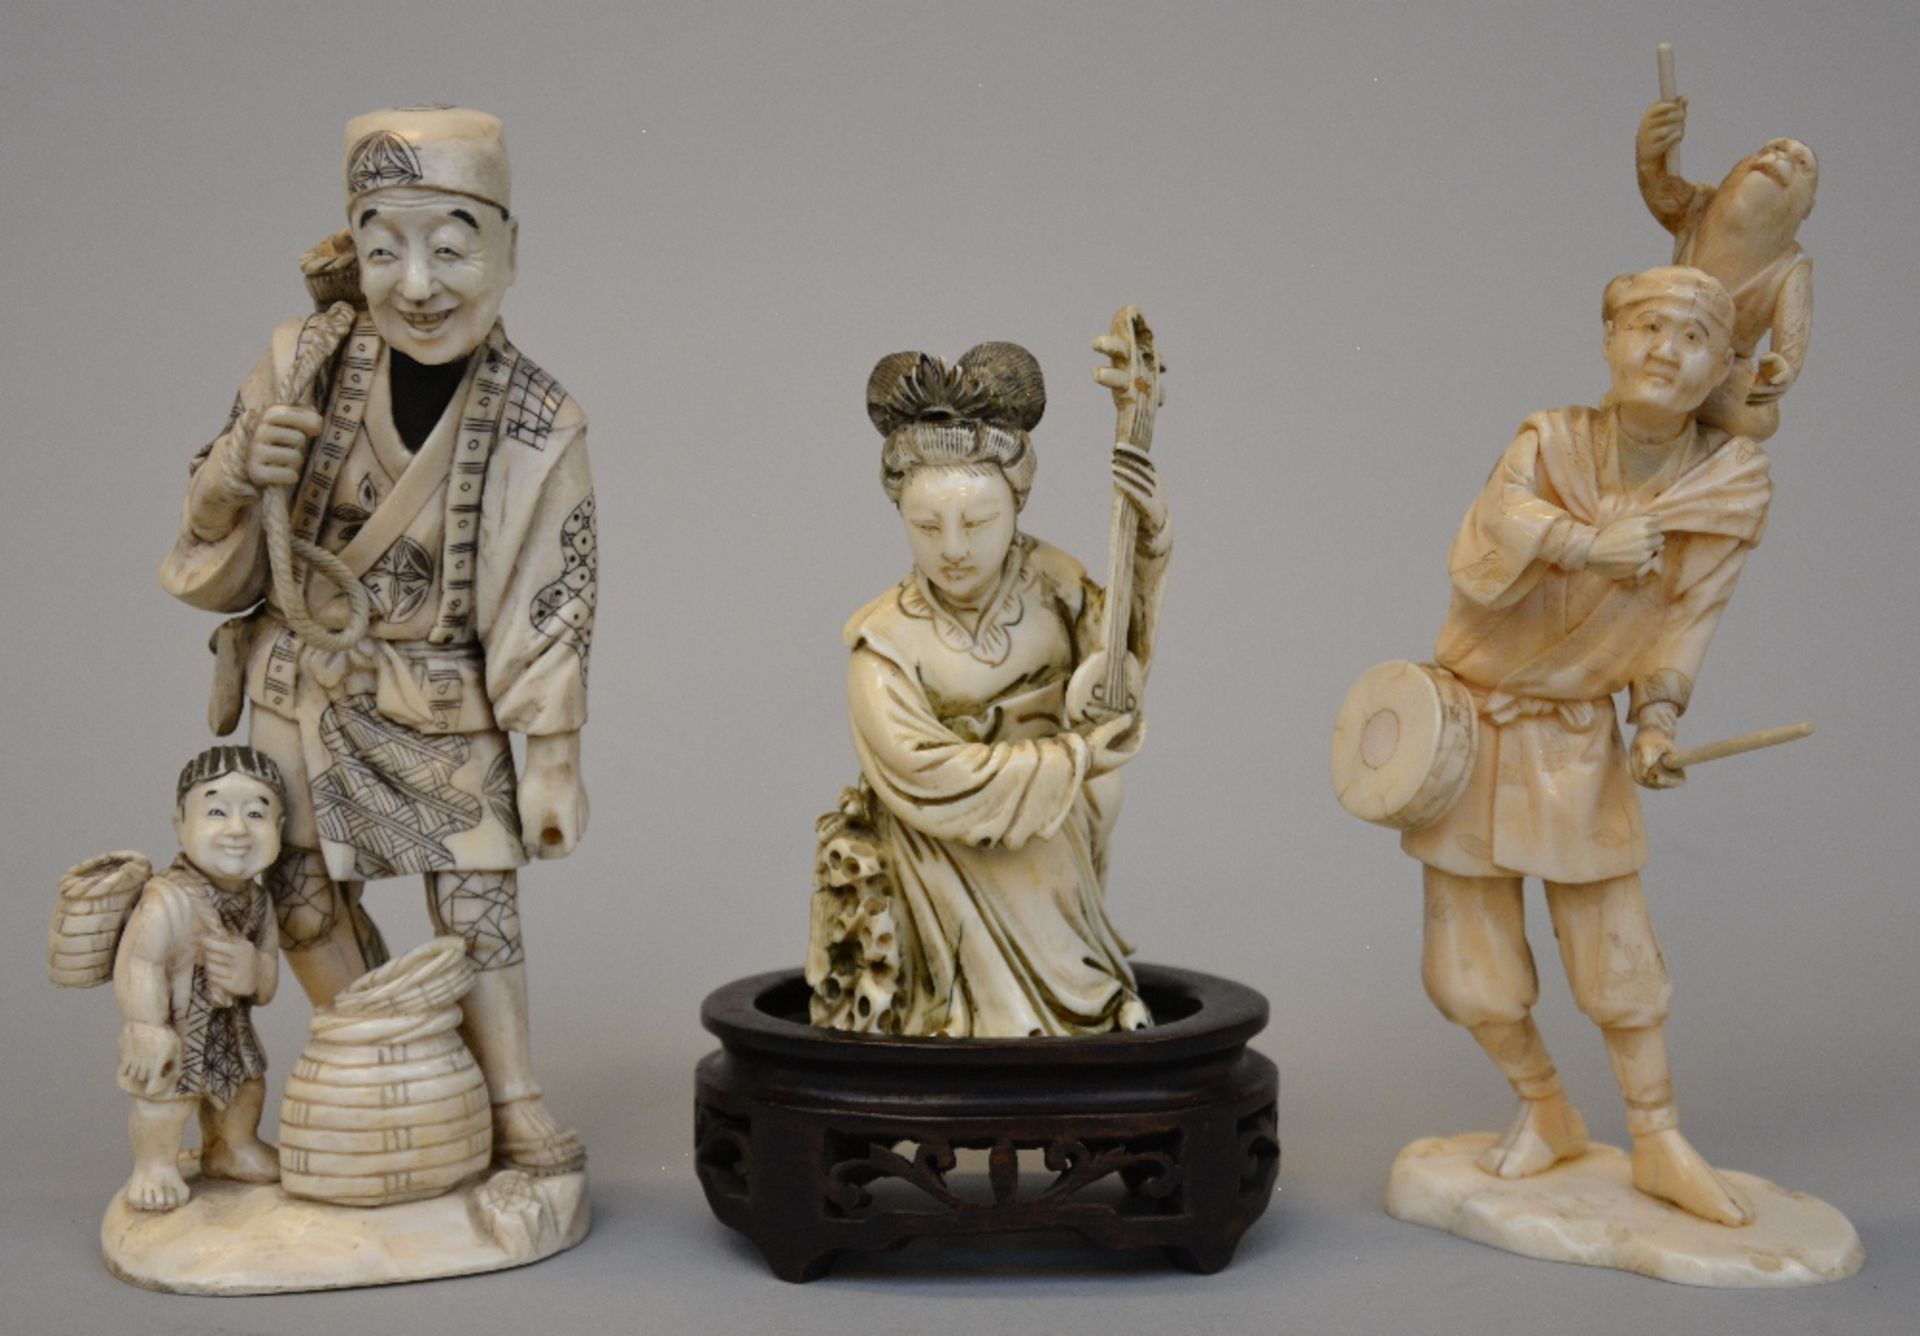 Two Japanese ivory okimono figures of a peddler with son and a street musician with monkey, both